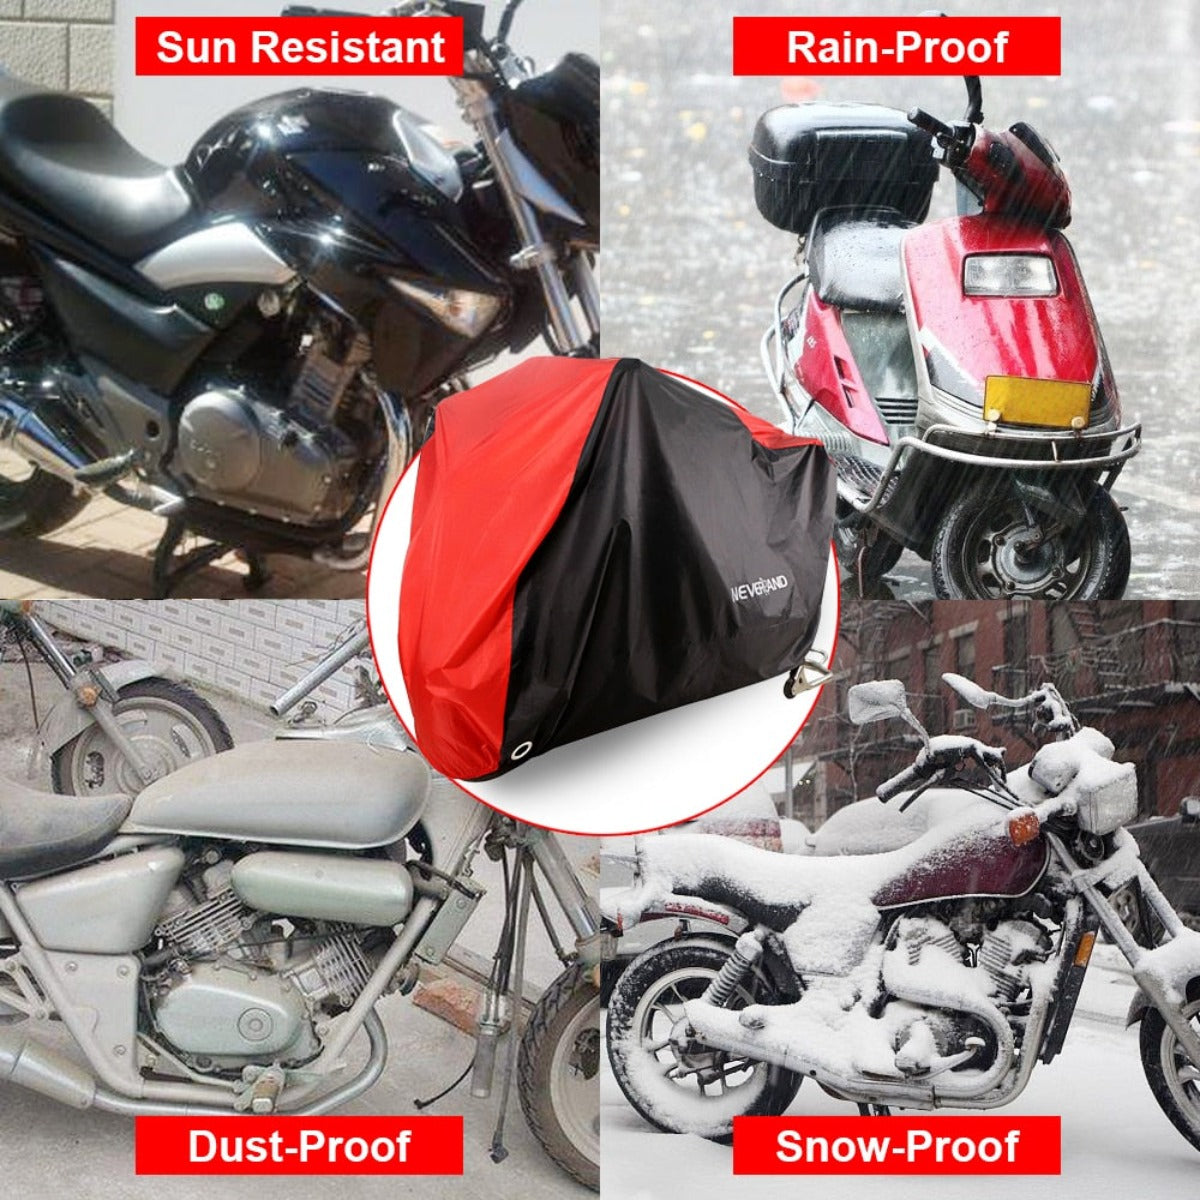 Sun Protector Motorcycle Cover - Yellow